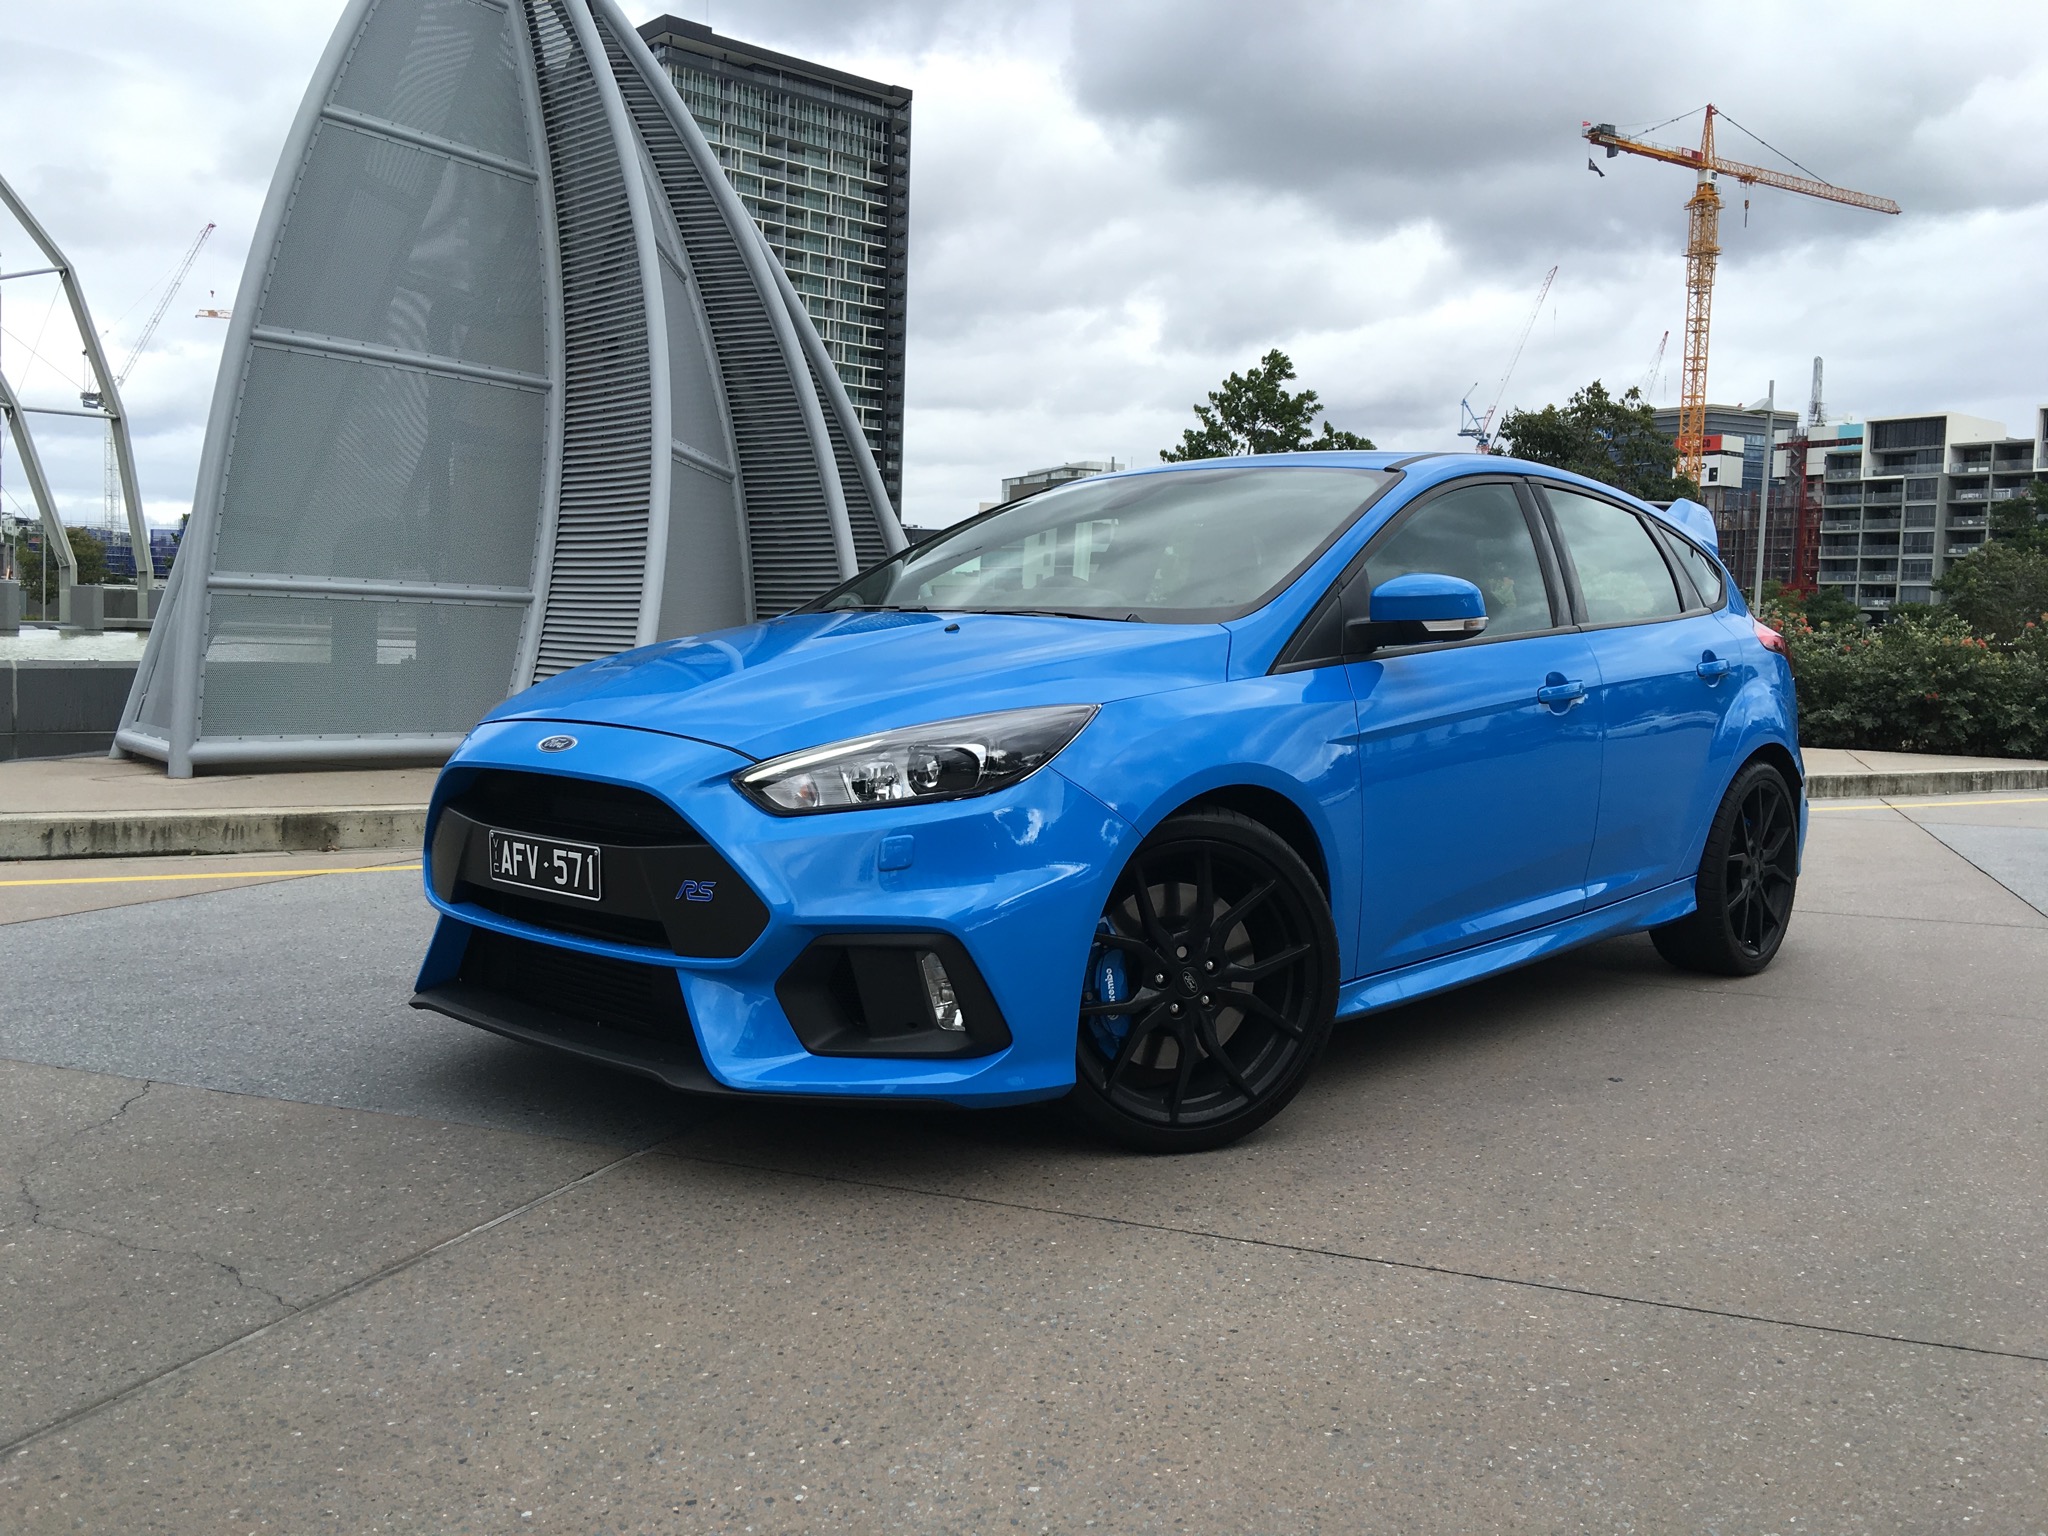 2017 Ford Focus RS Review - photos | CarAdvice